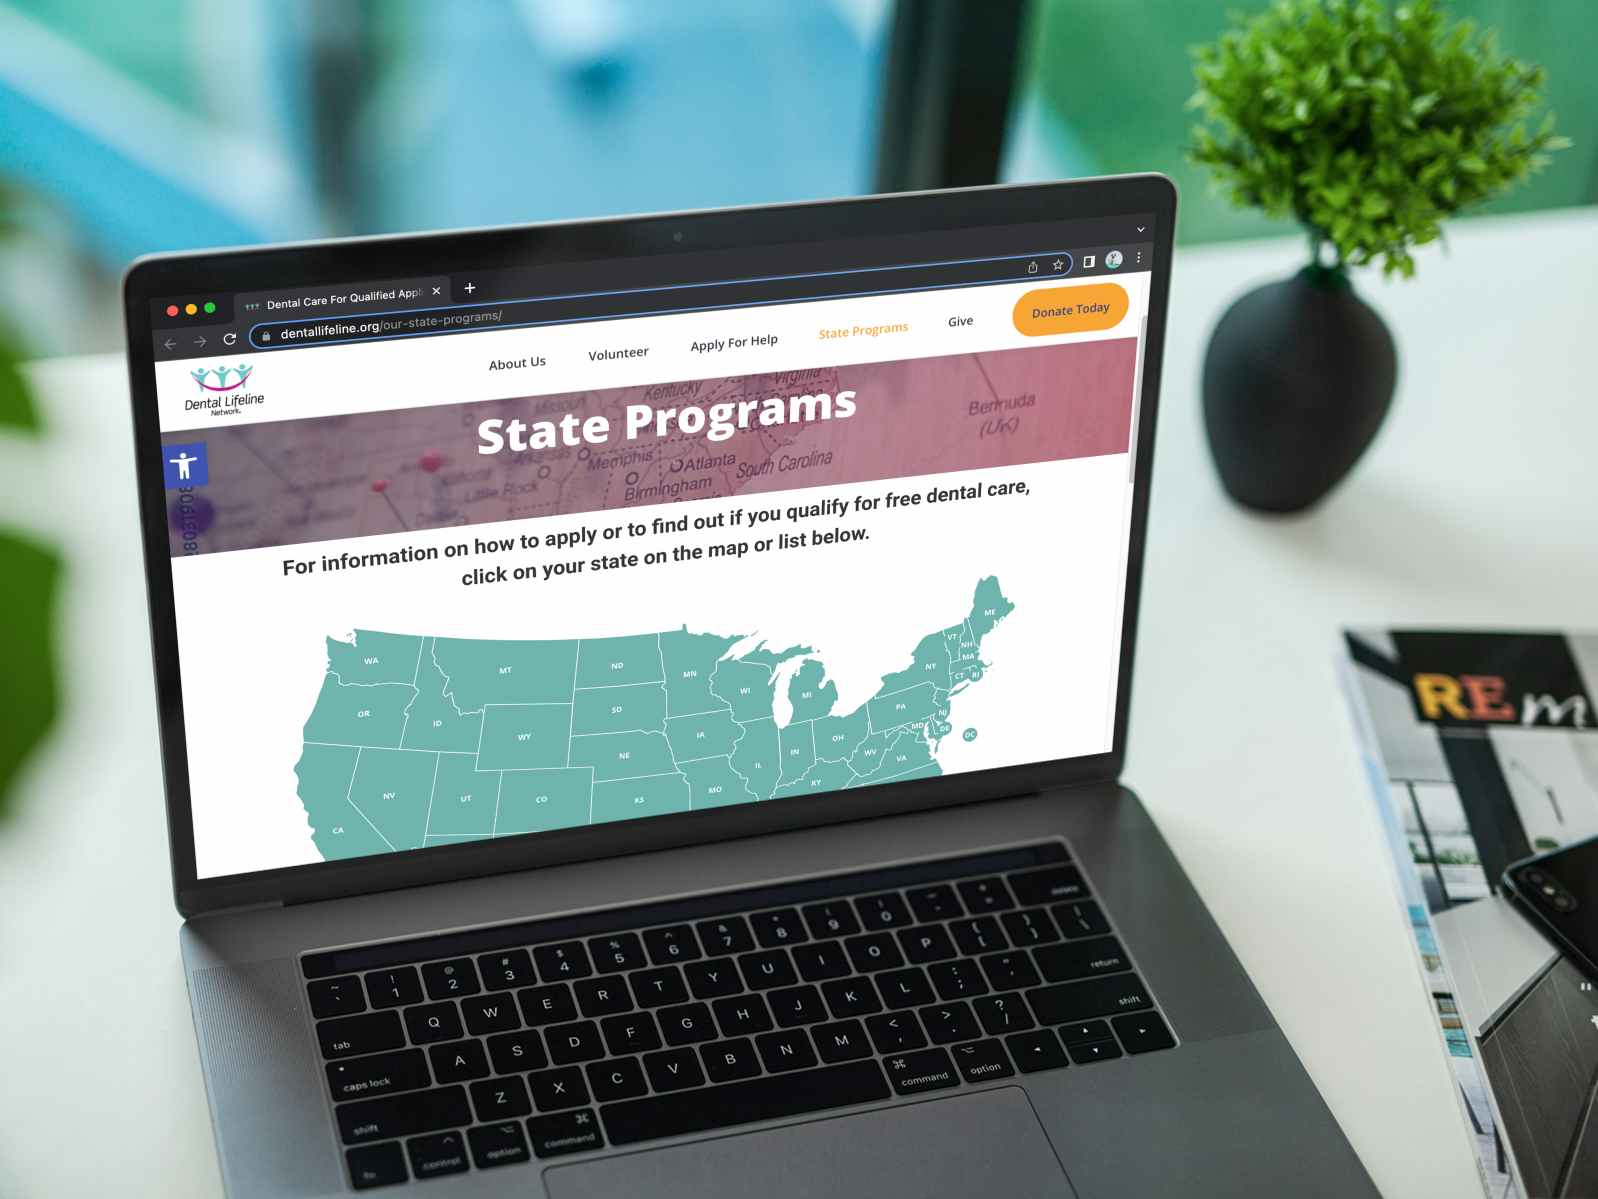 A laptop displaying the Dental Lifeline Network's website page for State Programs and a map